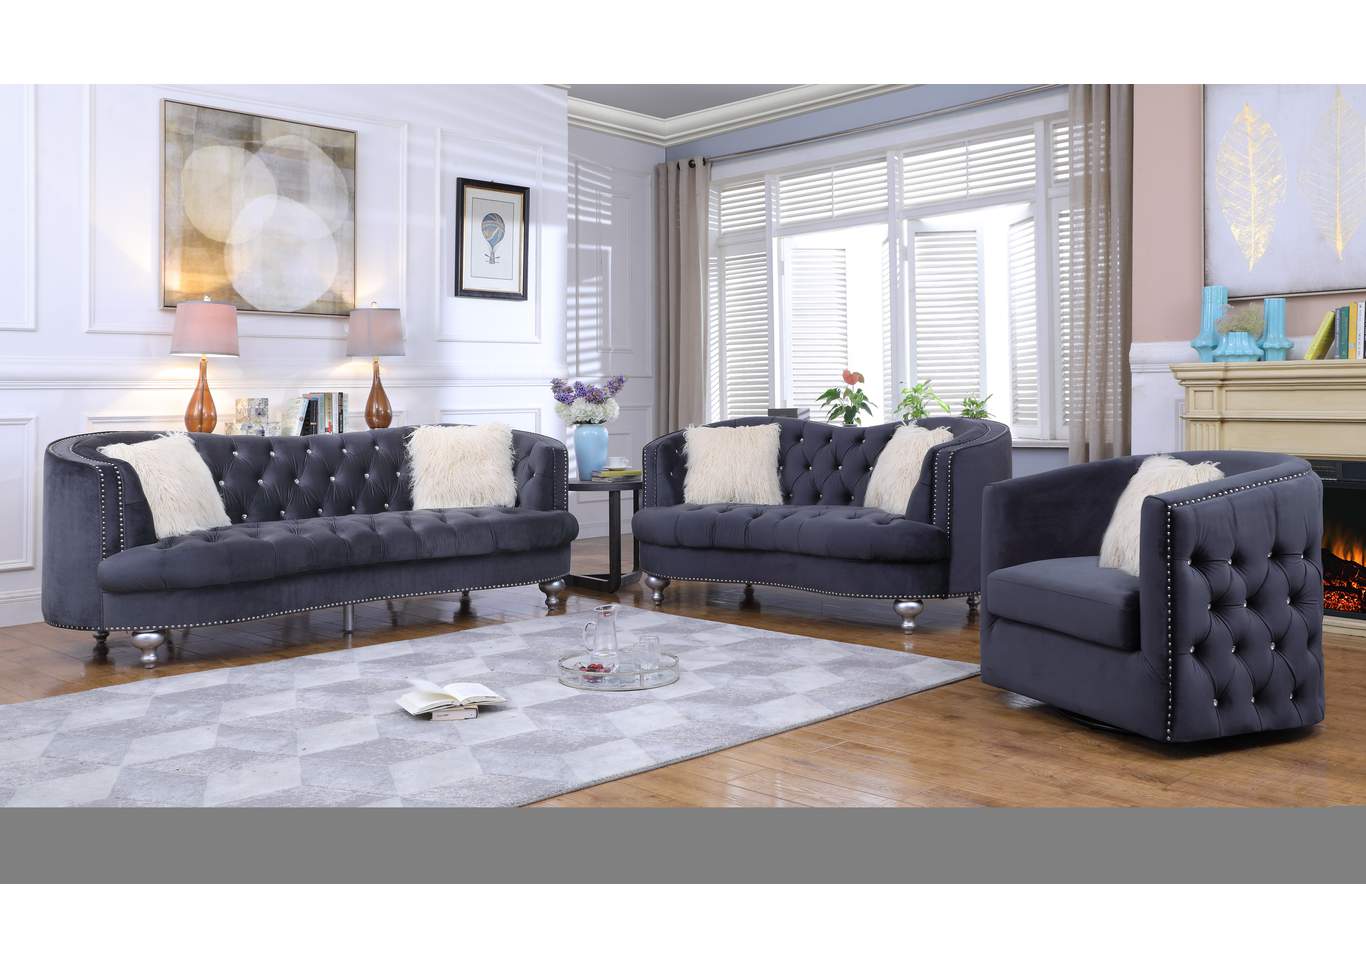 Upholstered Afreen Chair Gray,Galaxy Home Furniture